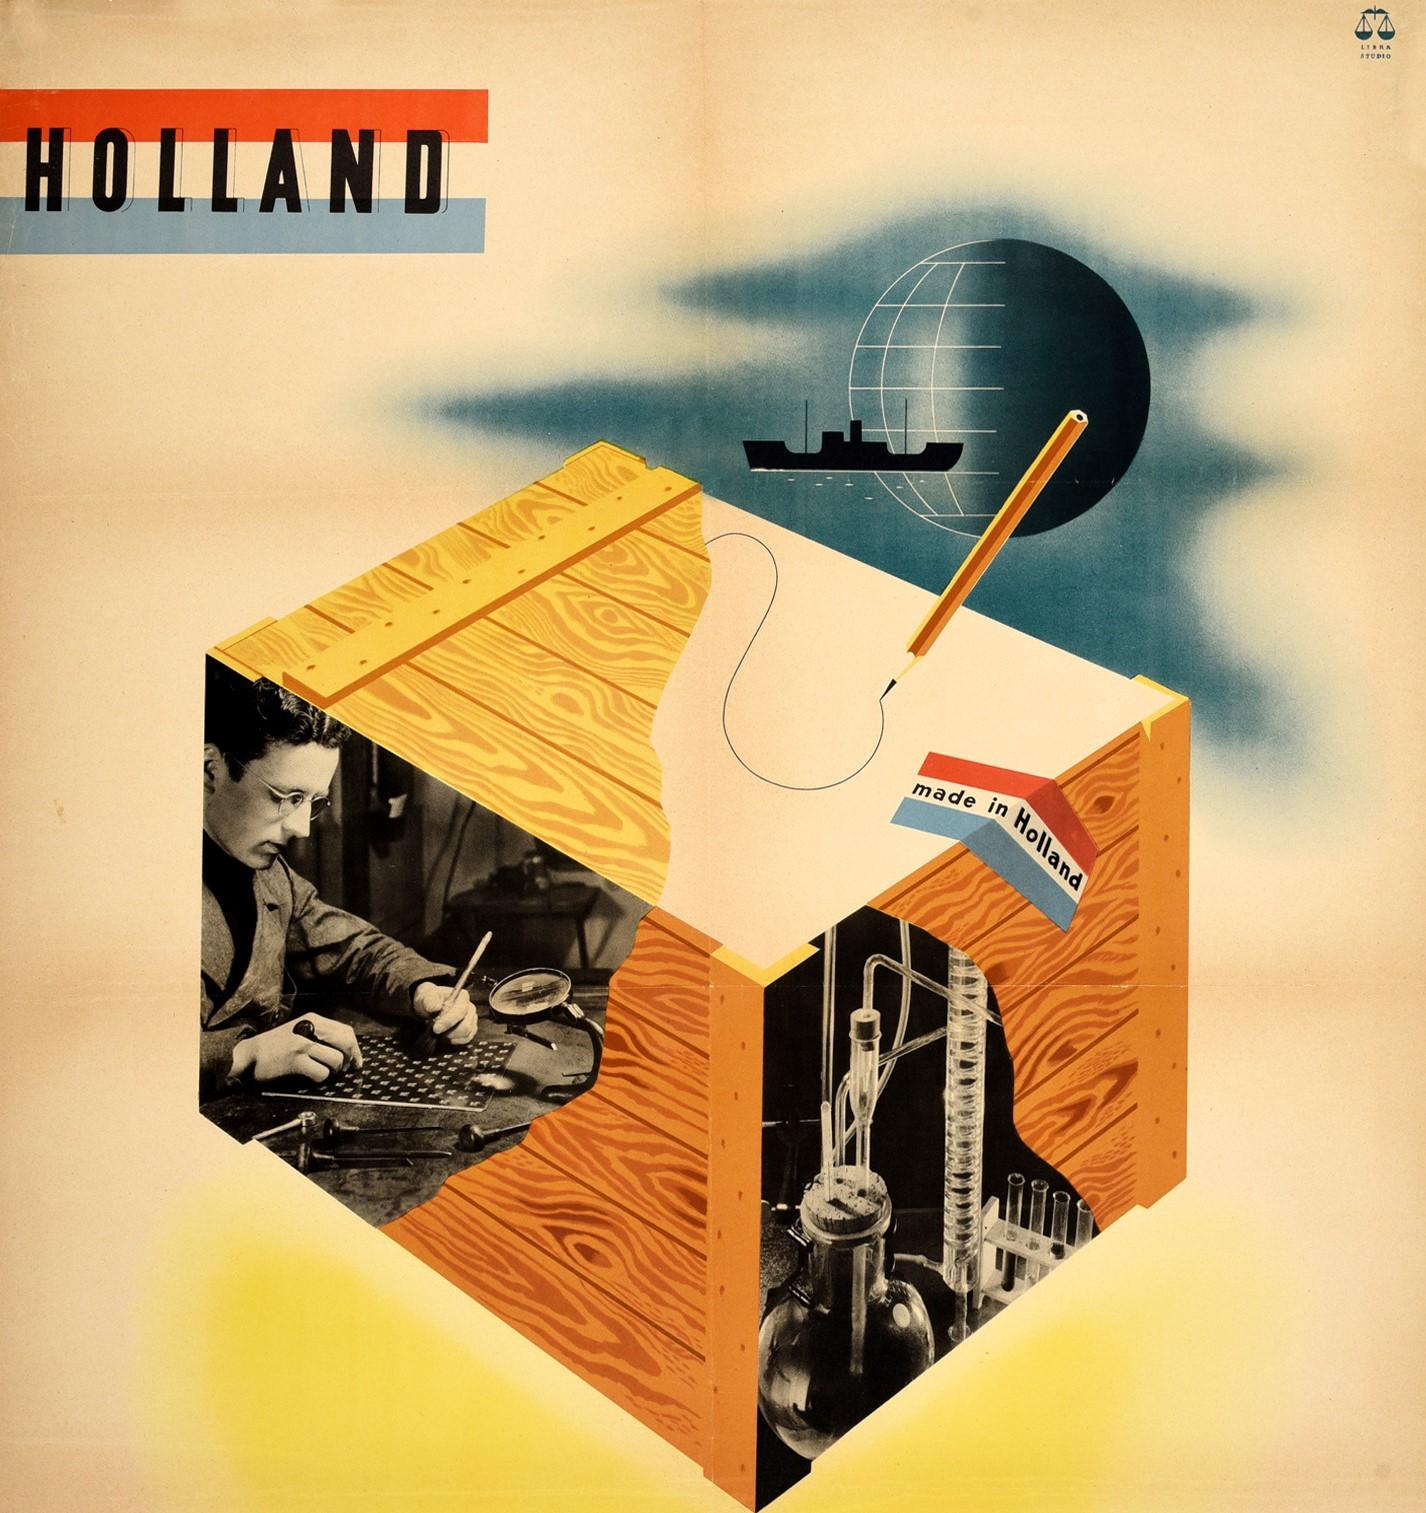 Original vintage poster - Holland Quality Science, art and craftsmanship combine efforts for Netherlands export - featuring a mid-century modern design depicting a wooden shipping container with a pencil drawing a line on the top next to a Made in